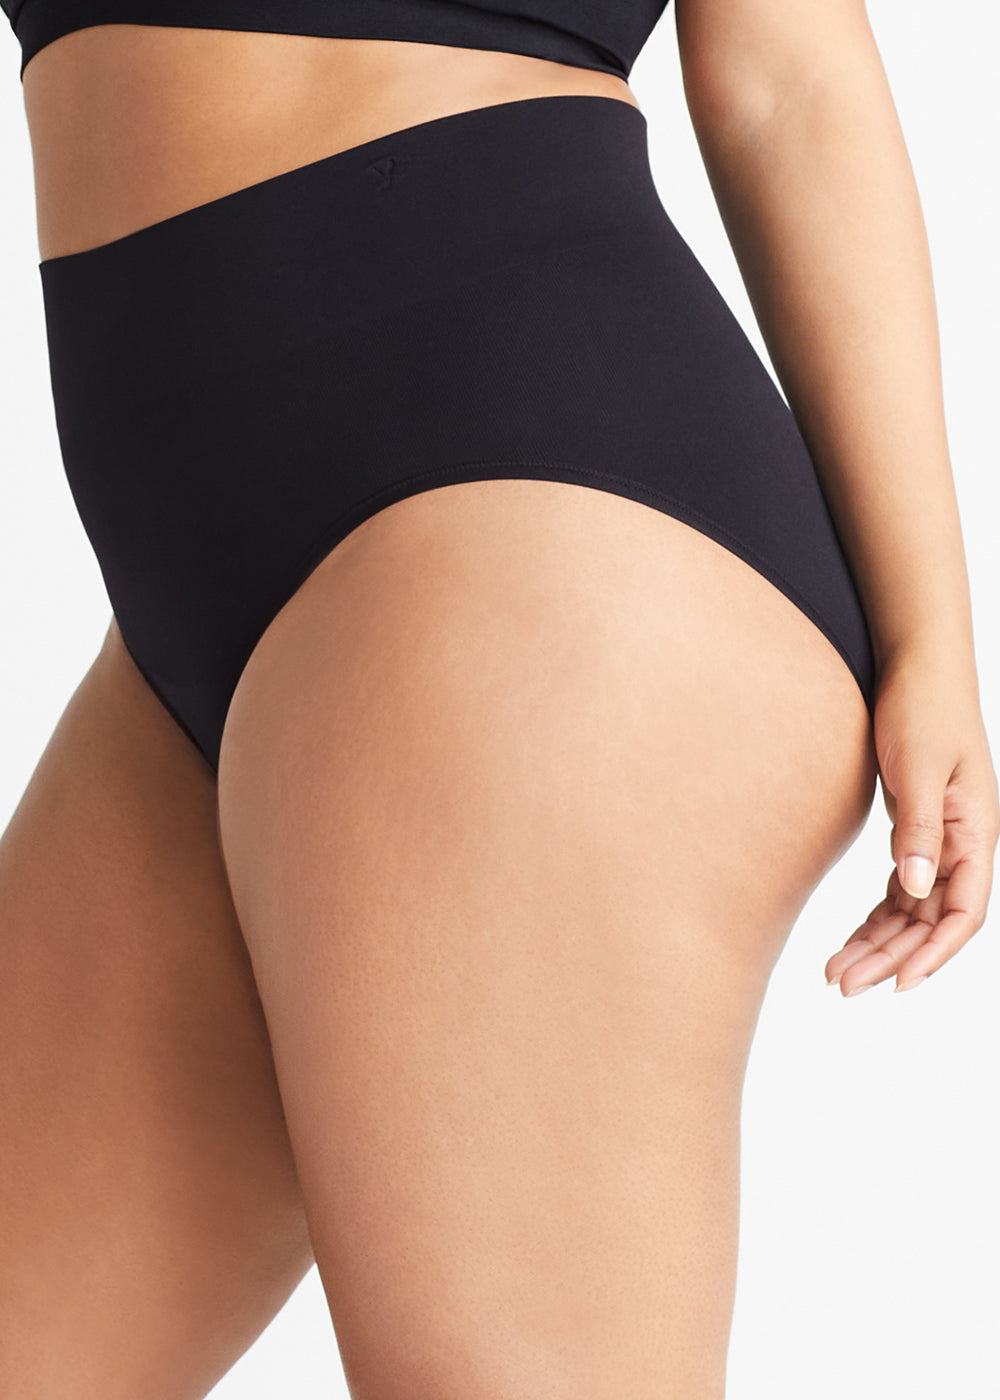 livi comfortably curved smoothing brief - seamless in Black worn by a woman standing sideways with left arm at side Yummie